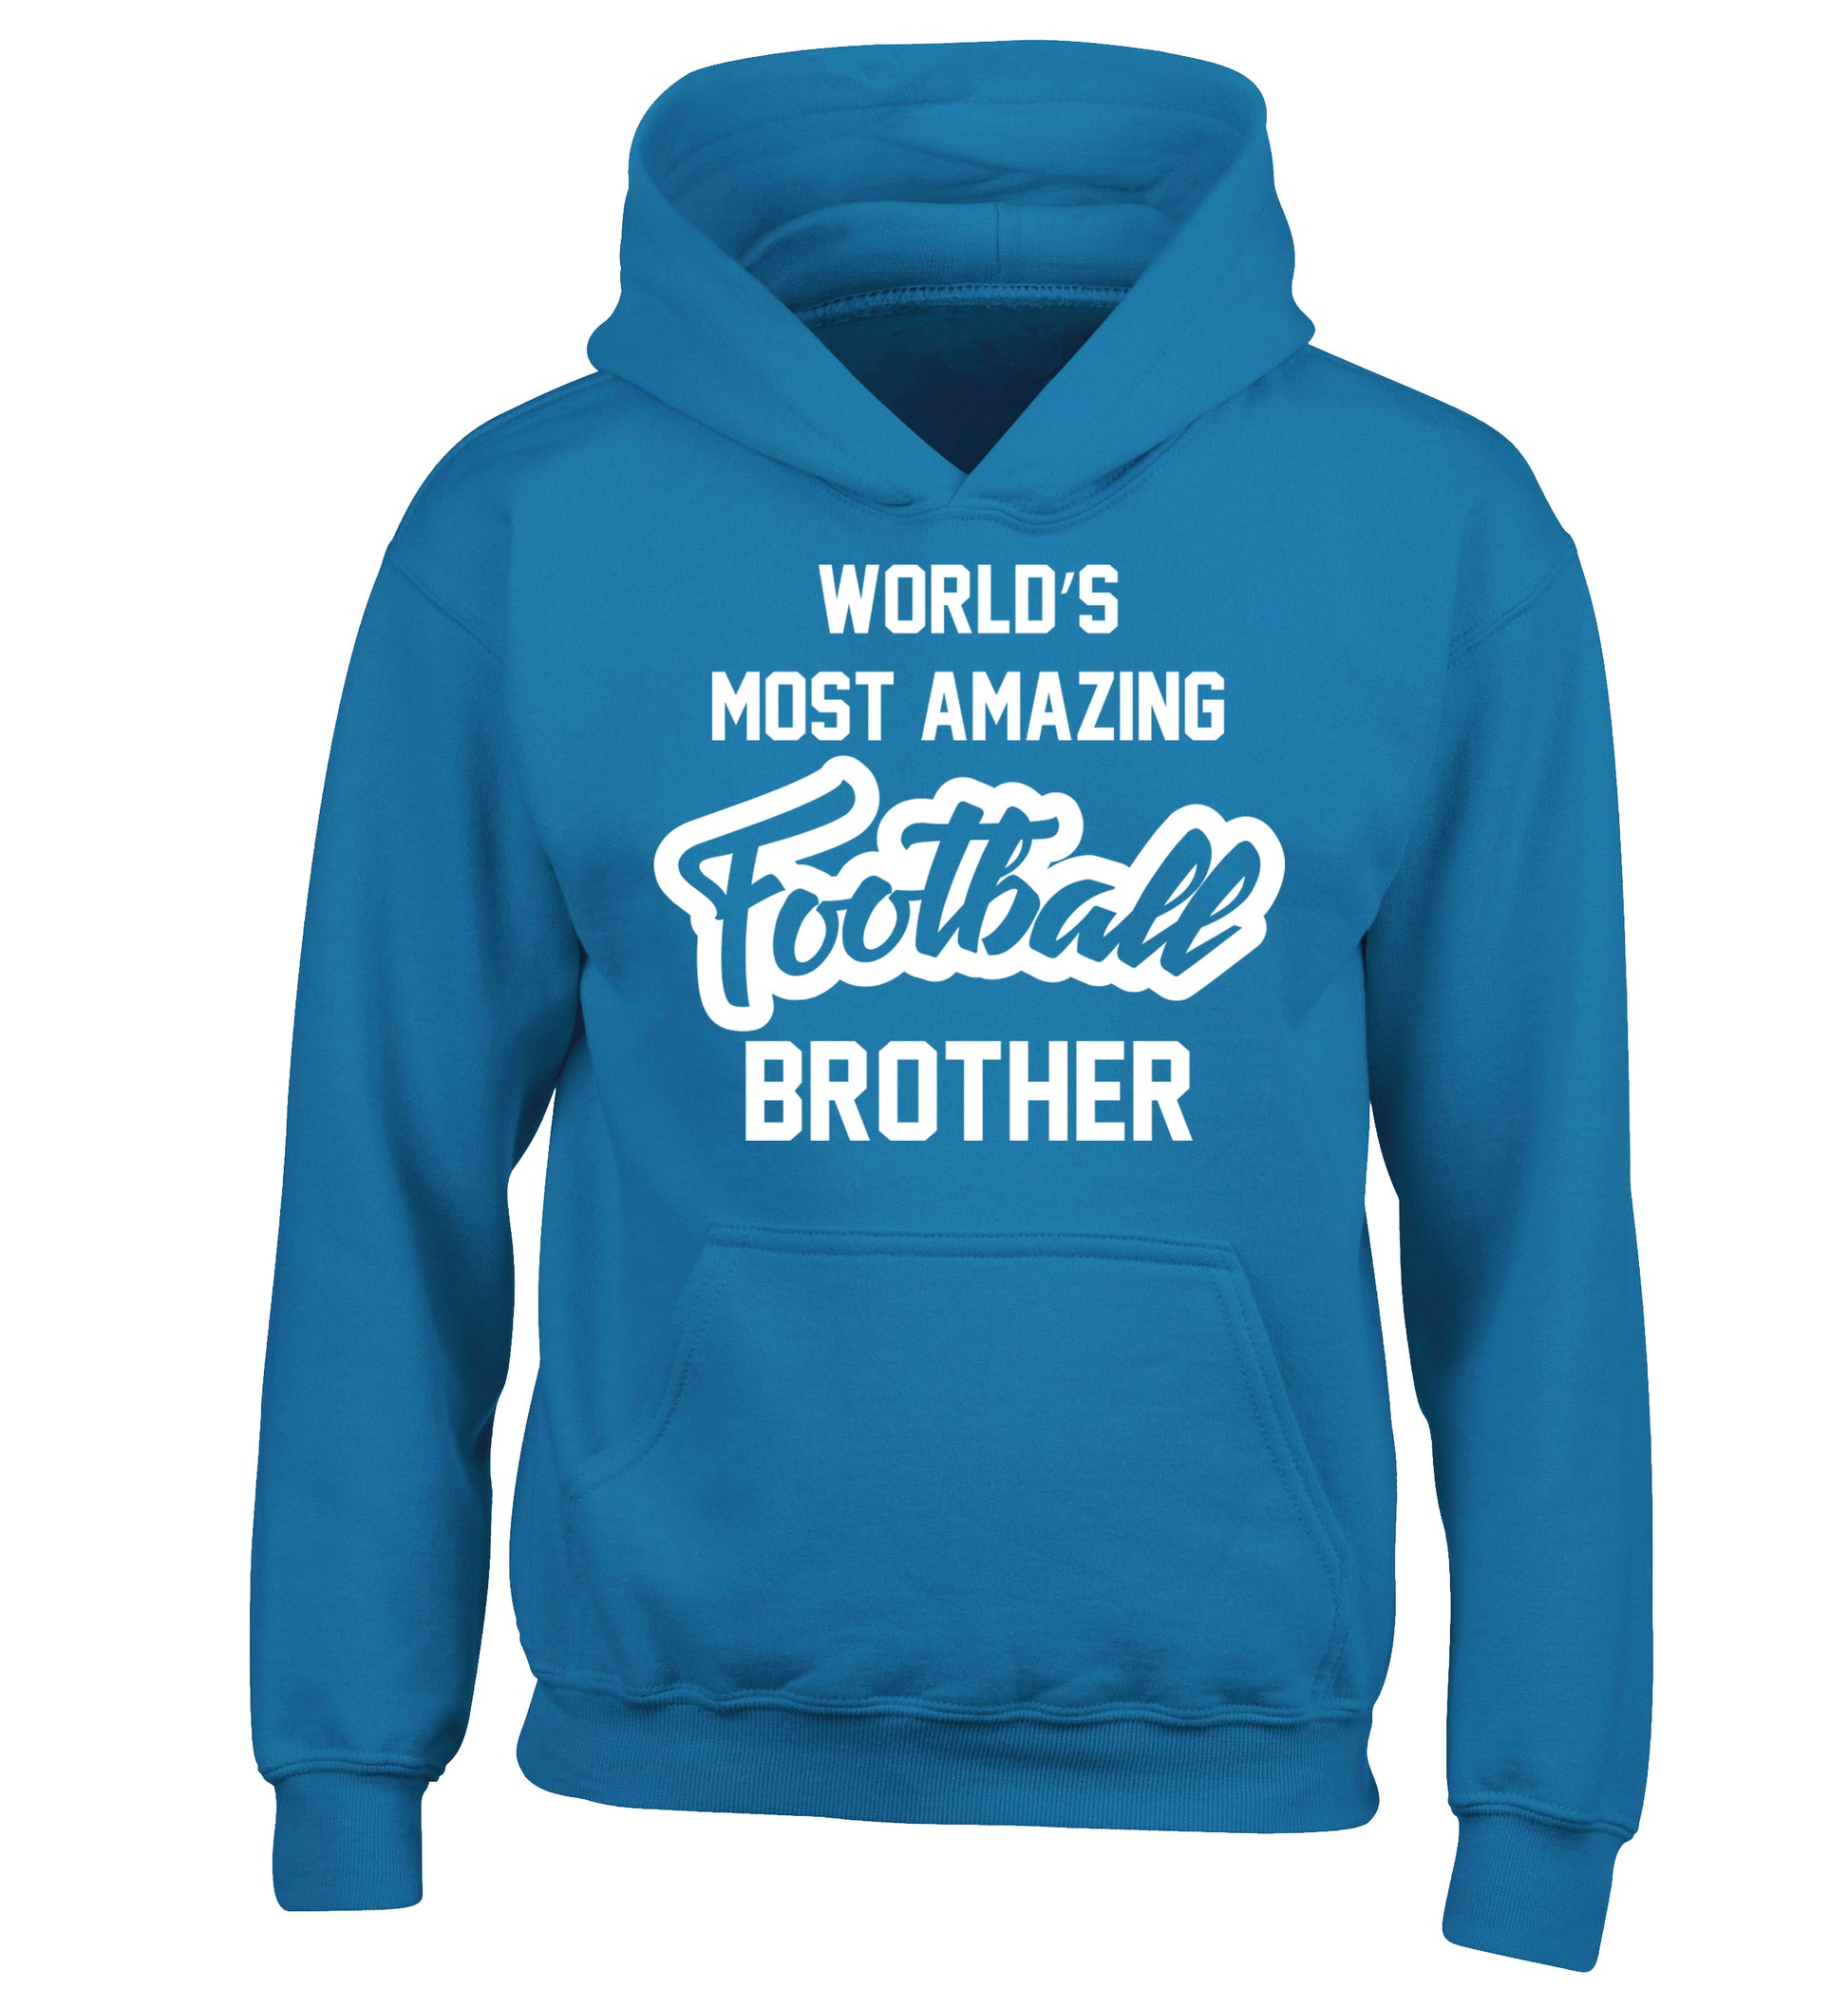 Worlds most amazing football brother children's blue hoodie 12-14 Years